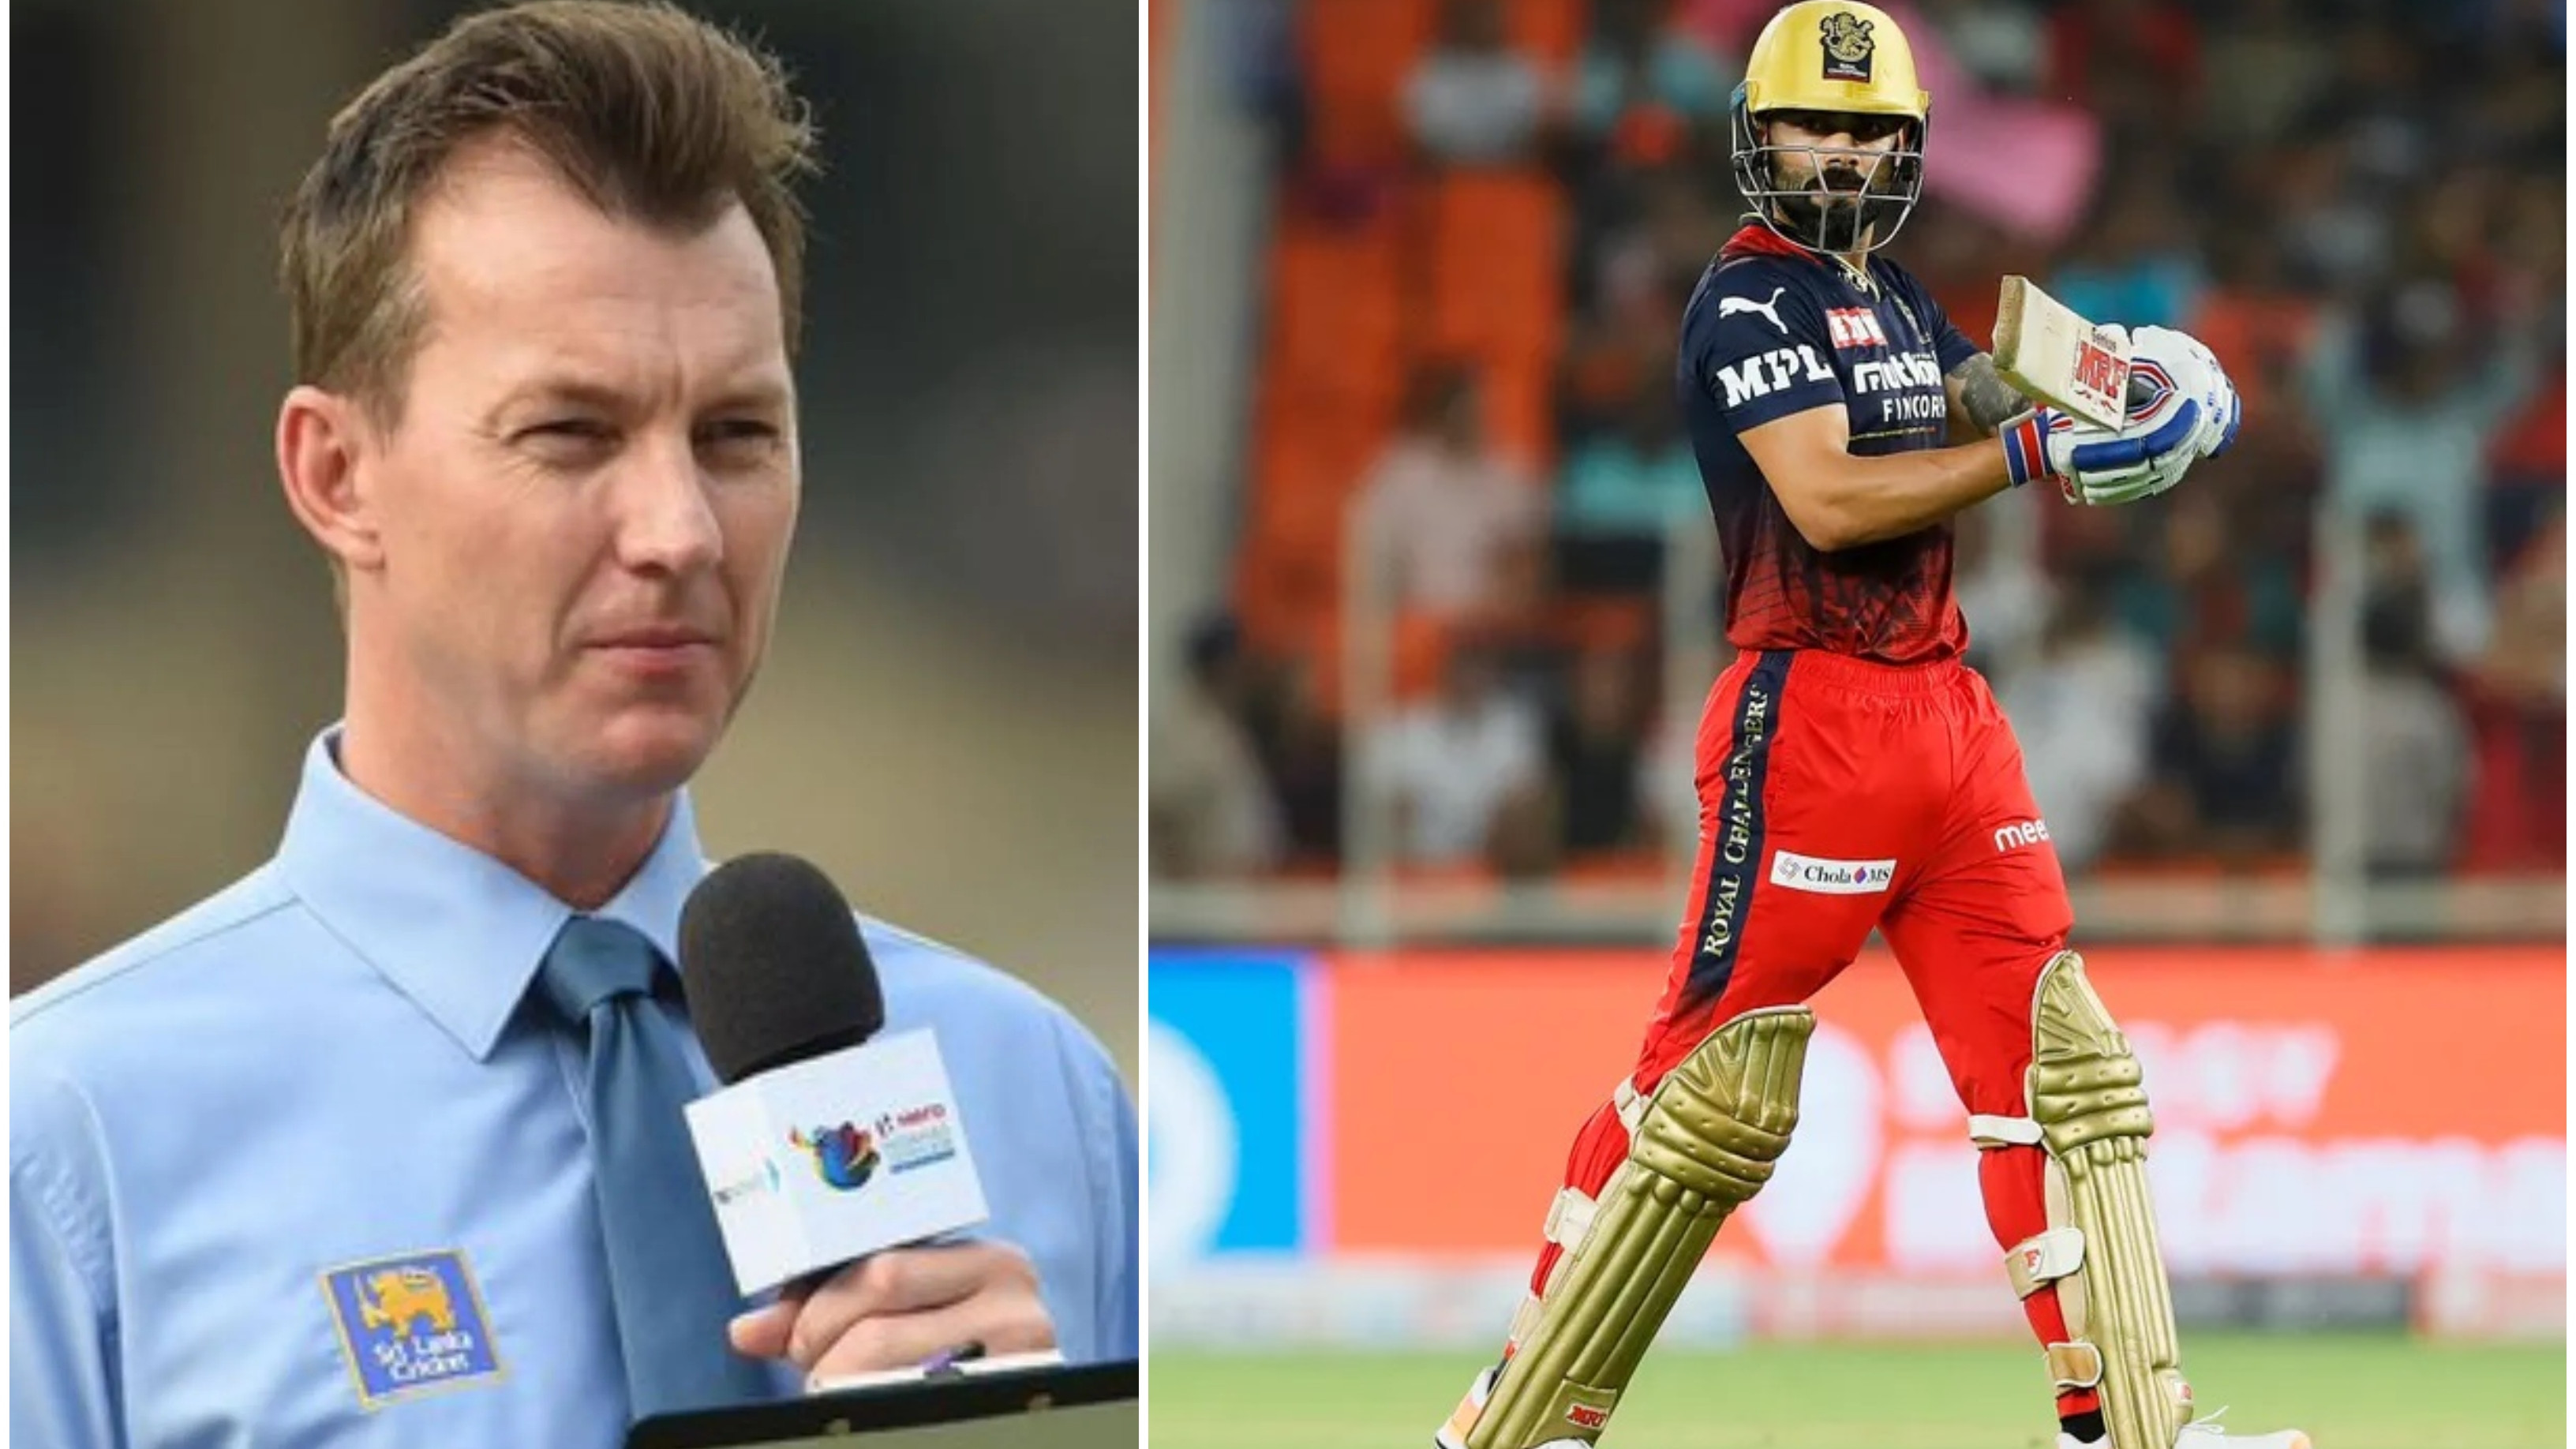 IPL 2022: “Maybe just have a rest from cricket”, Brett Lee on Virat Kohli’s prolonged lean patch